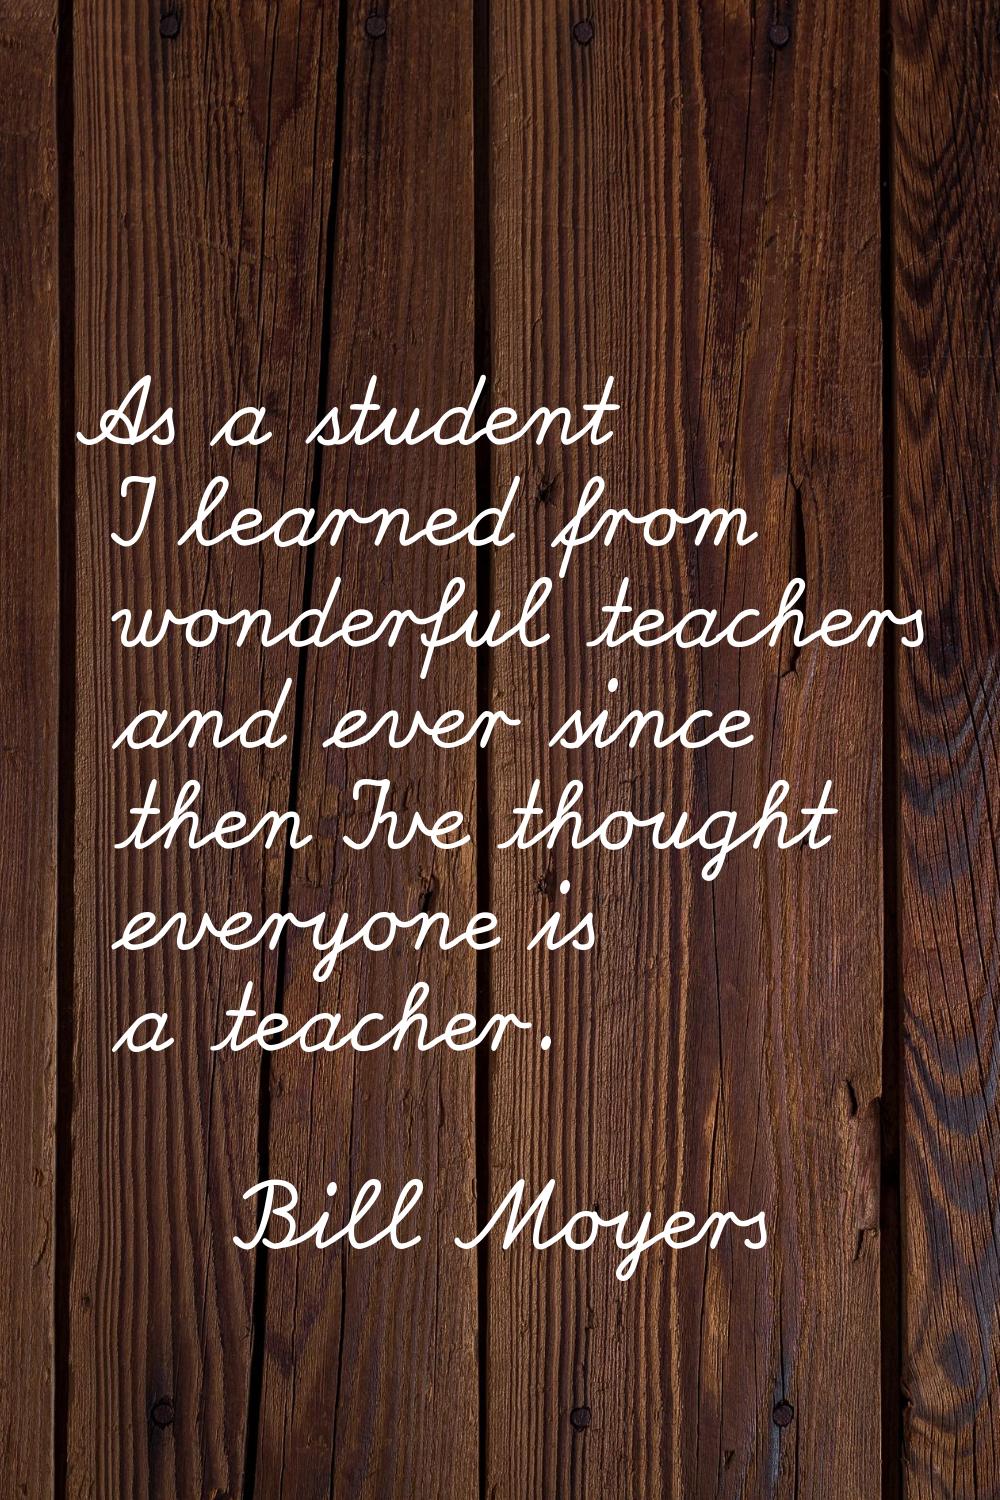 As a student I learned from wonderful teachers and ever since then I've thought everyone is a teach